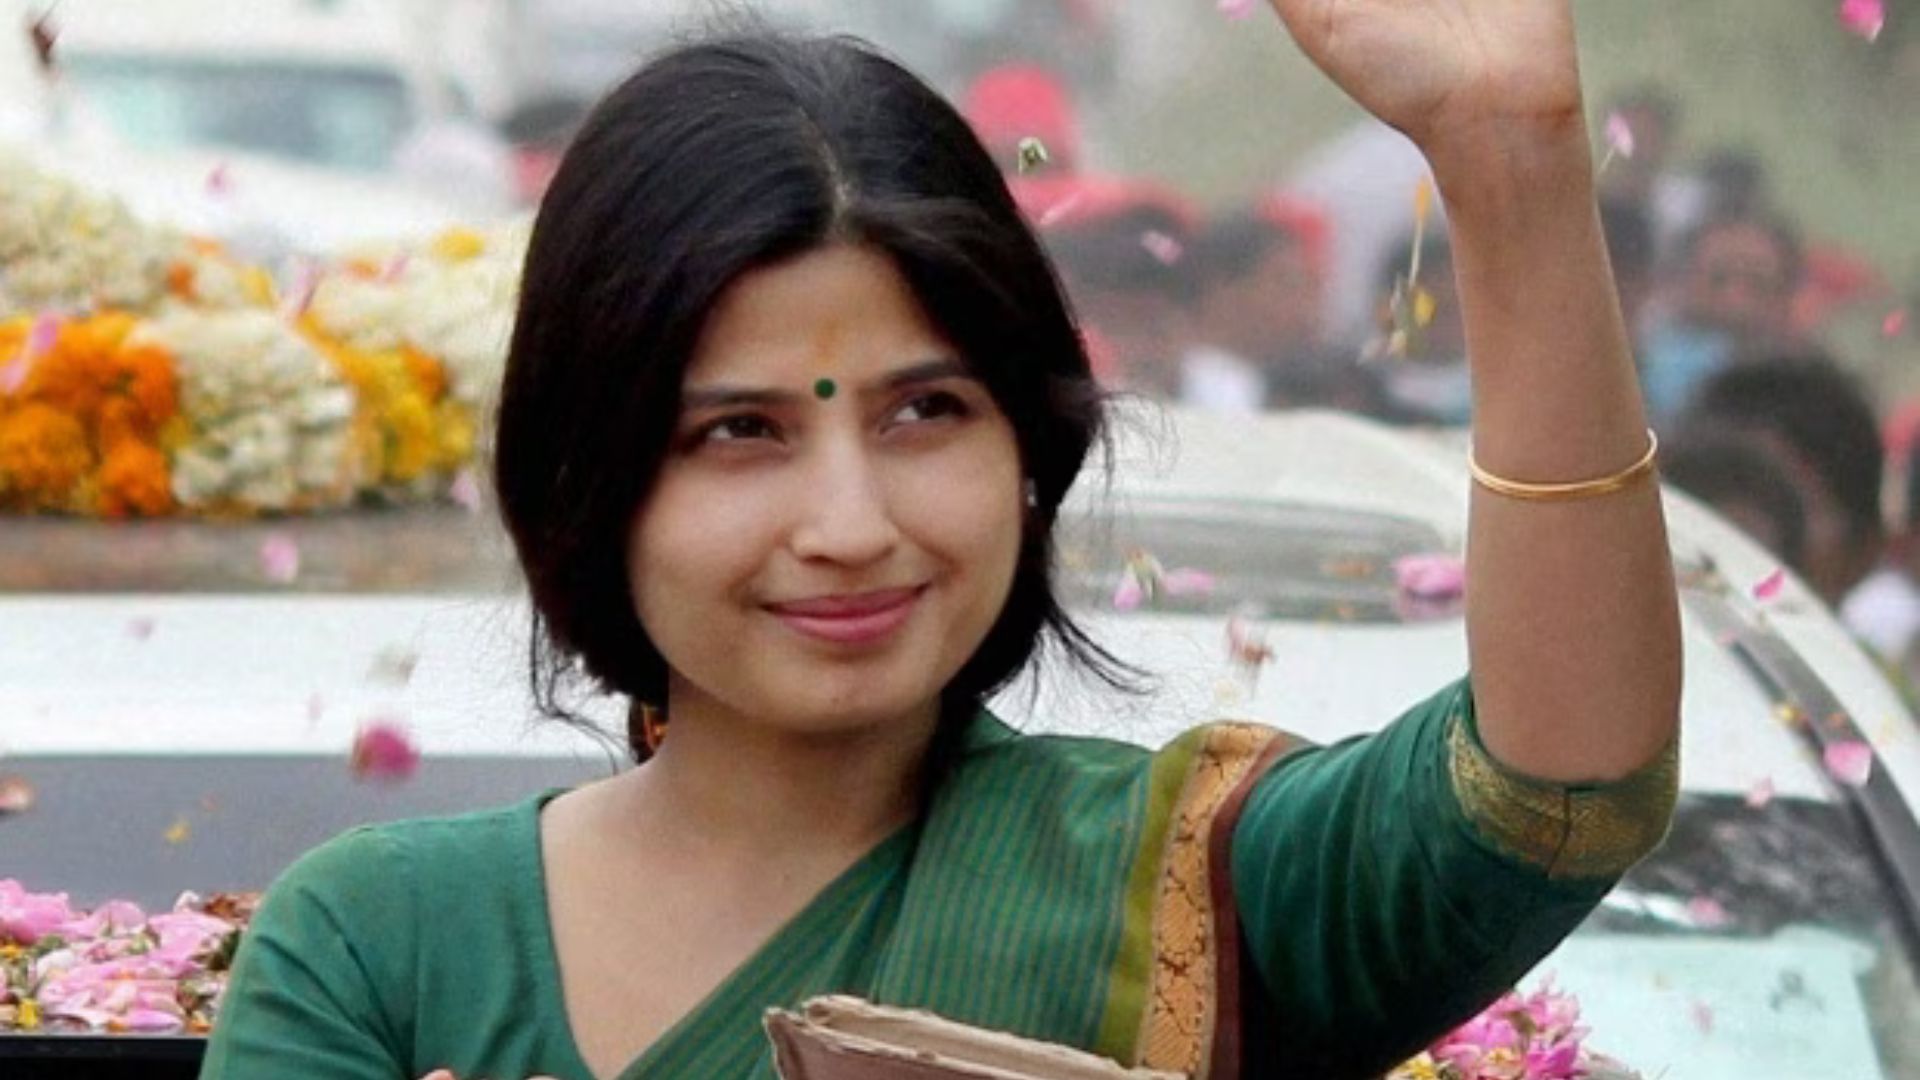 BSP replaces its candidate in Mainpuri against Dimple Yadav